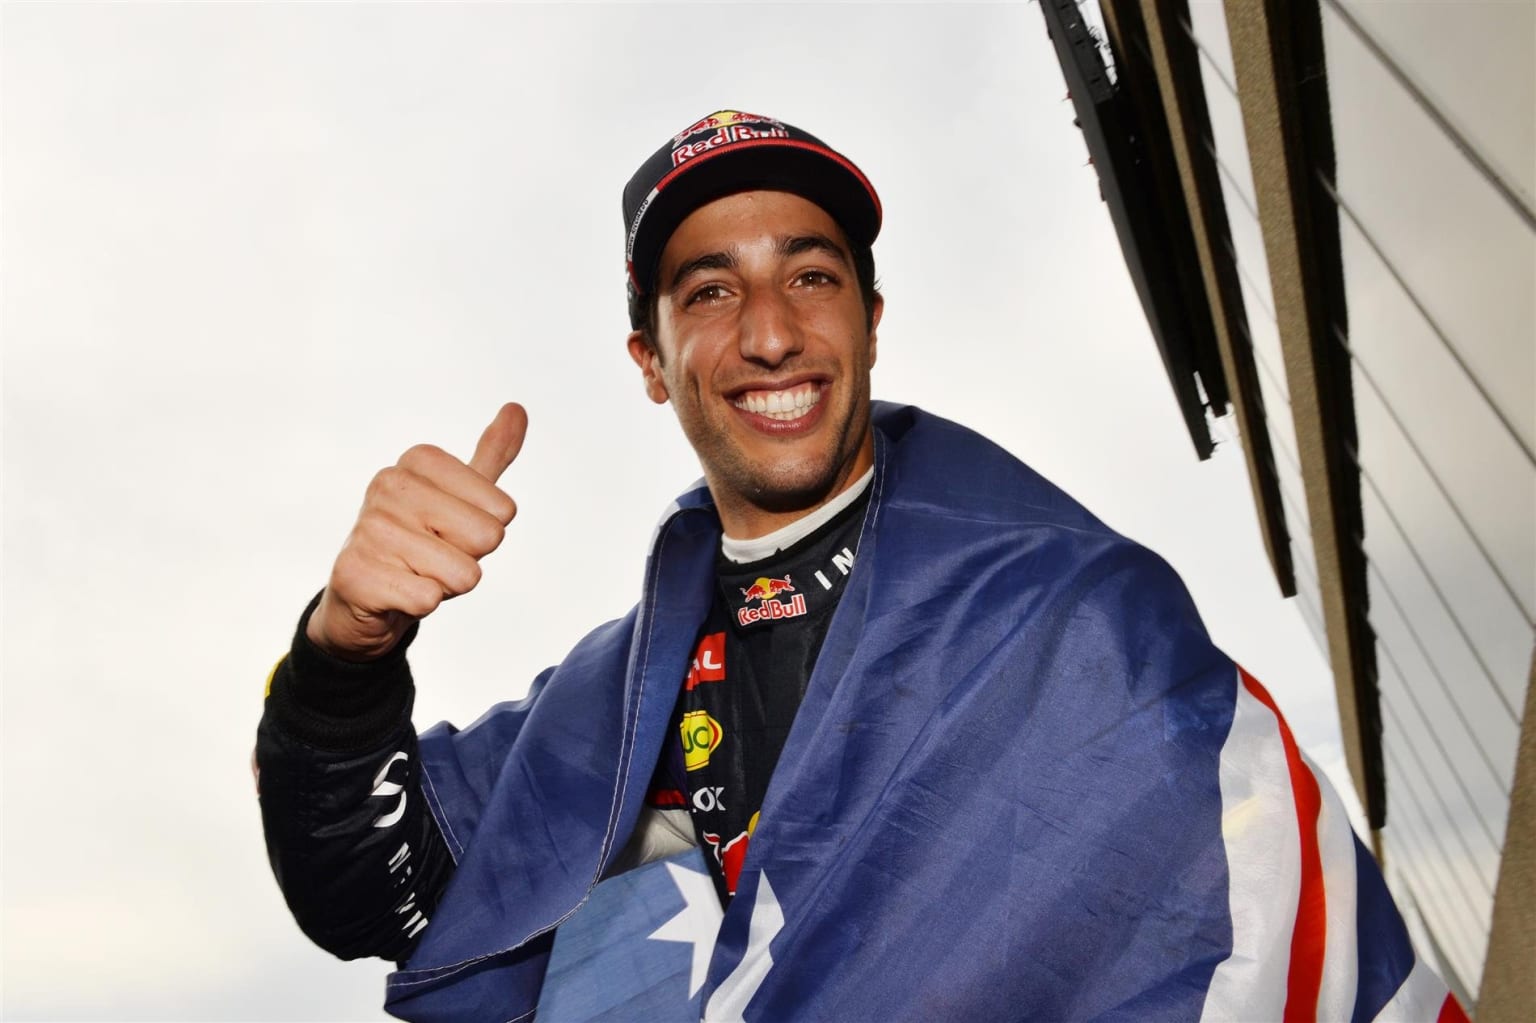 The First Time - with Red Bull's Daniel Ricciardo